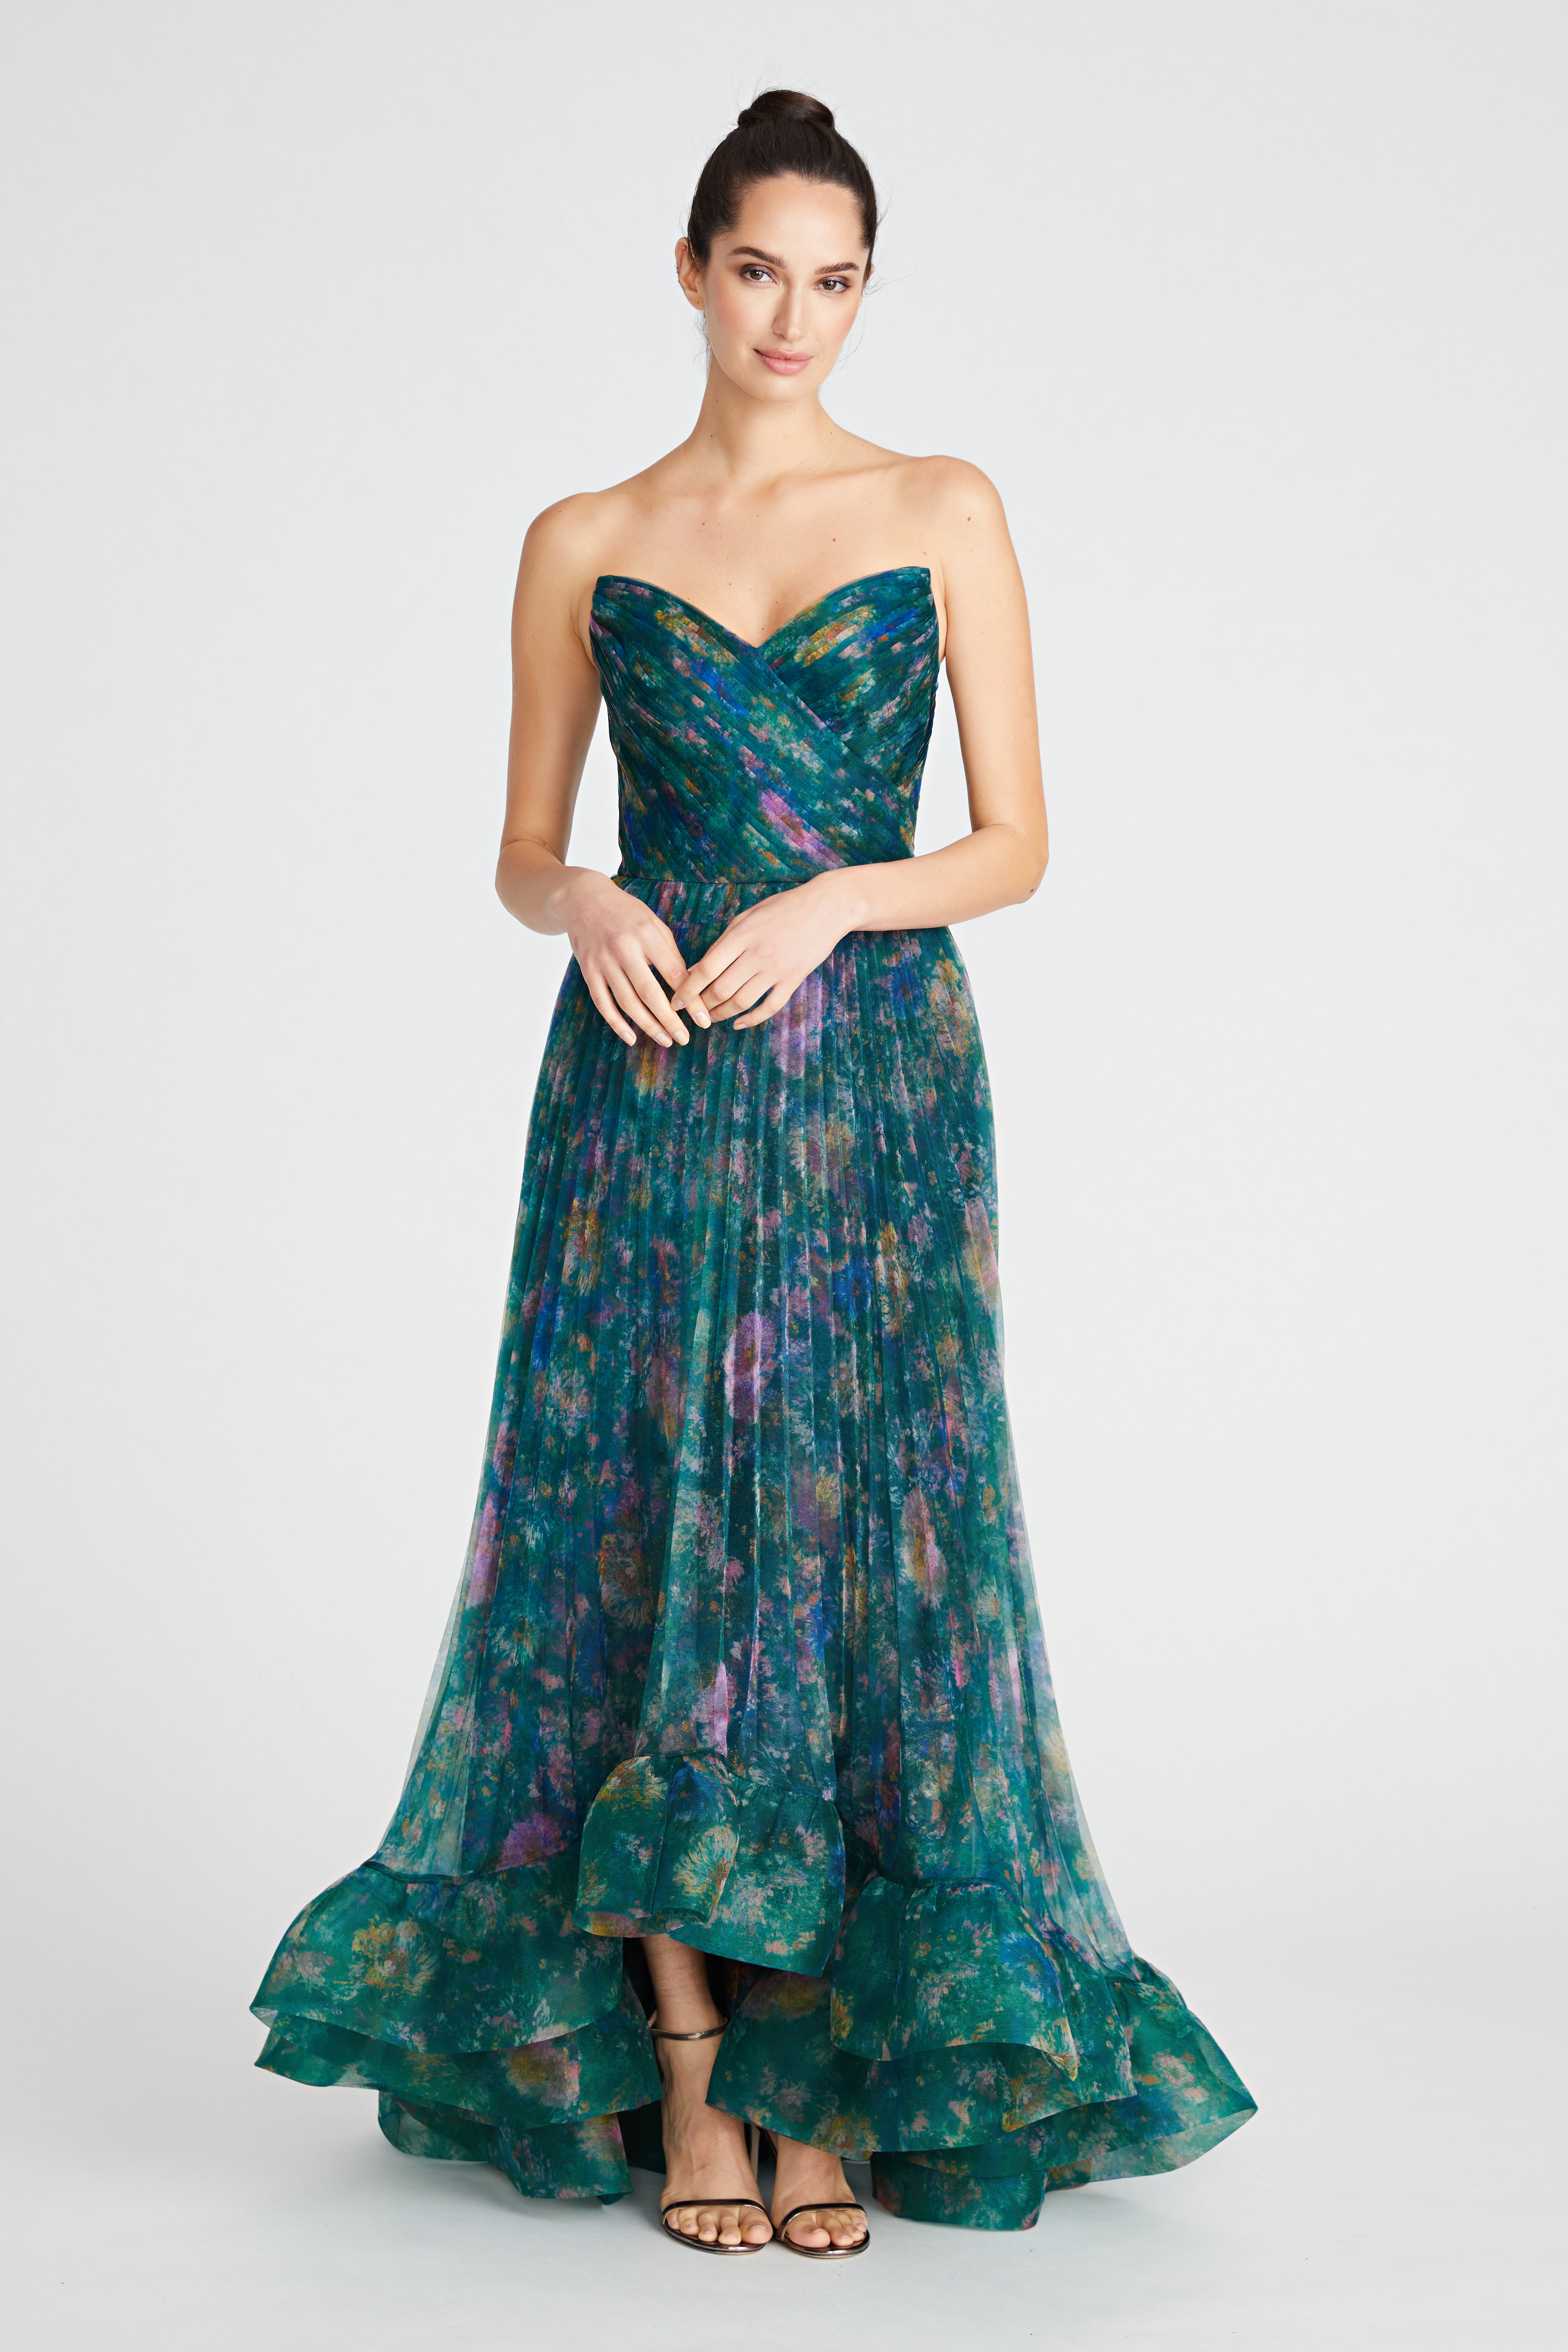 Moira Strapless High Low Gown – THEIA